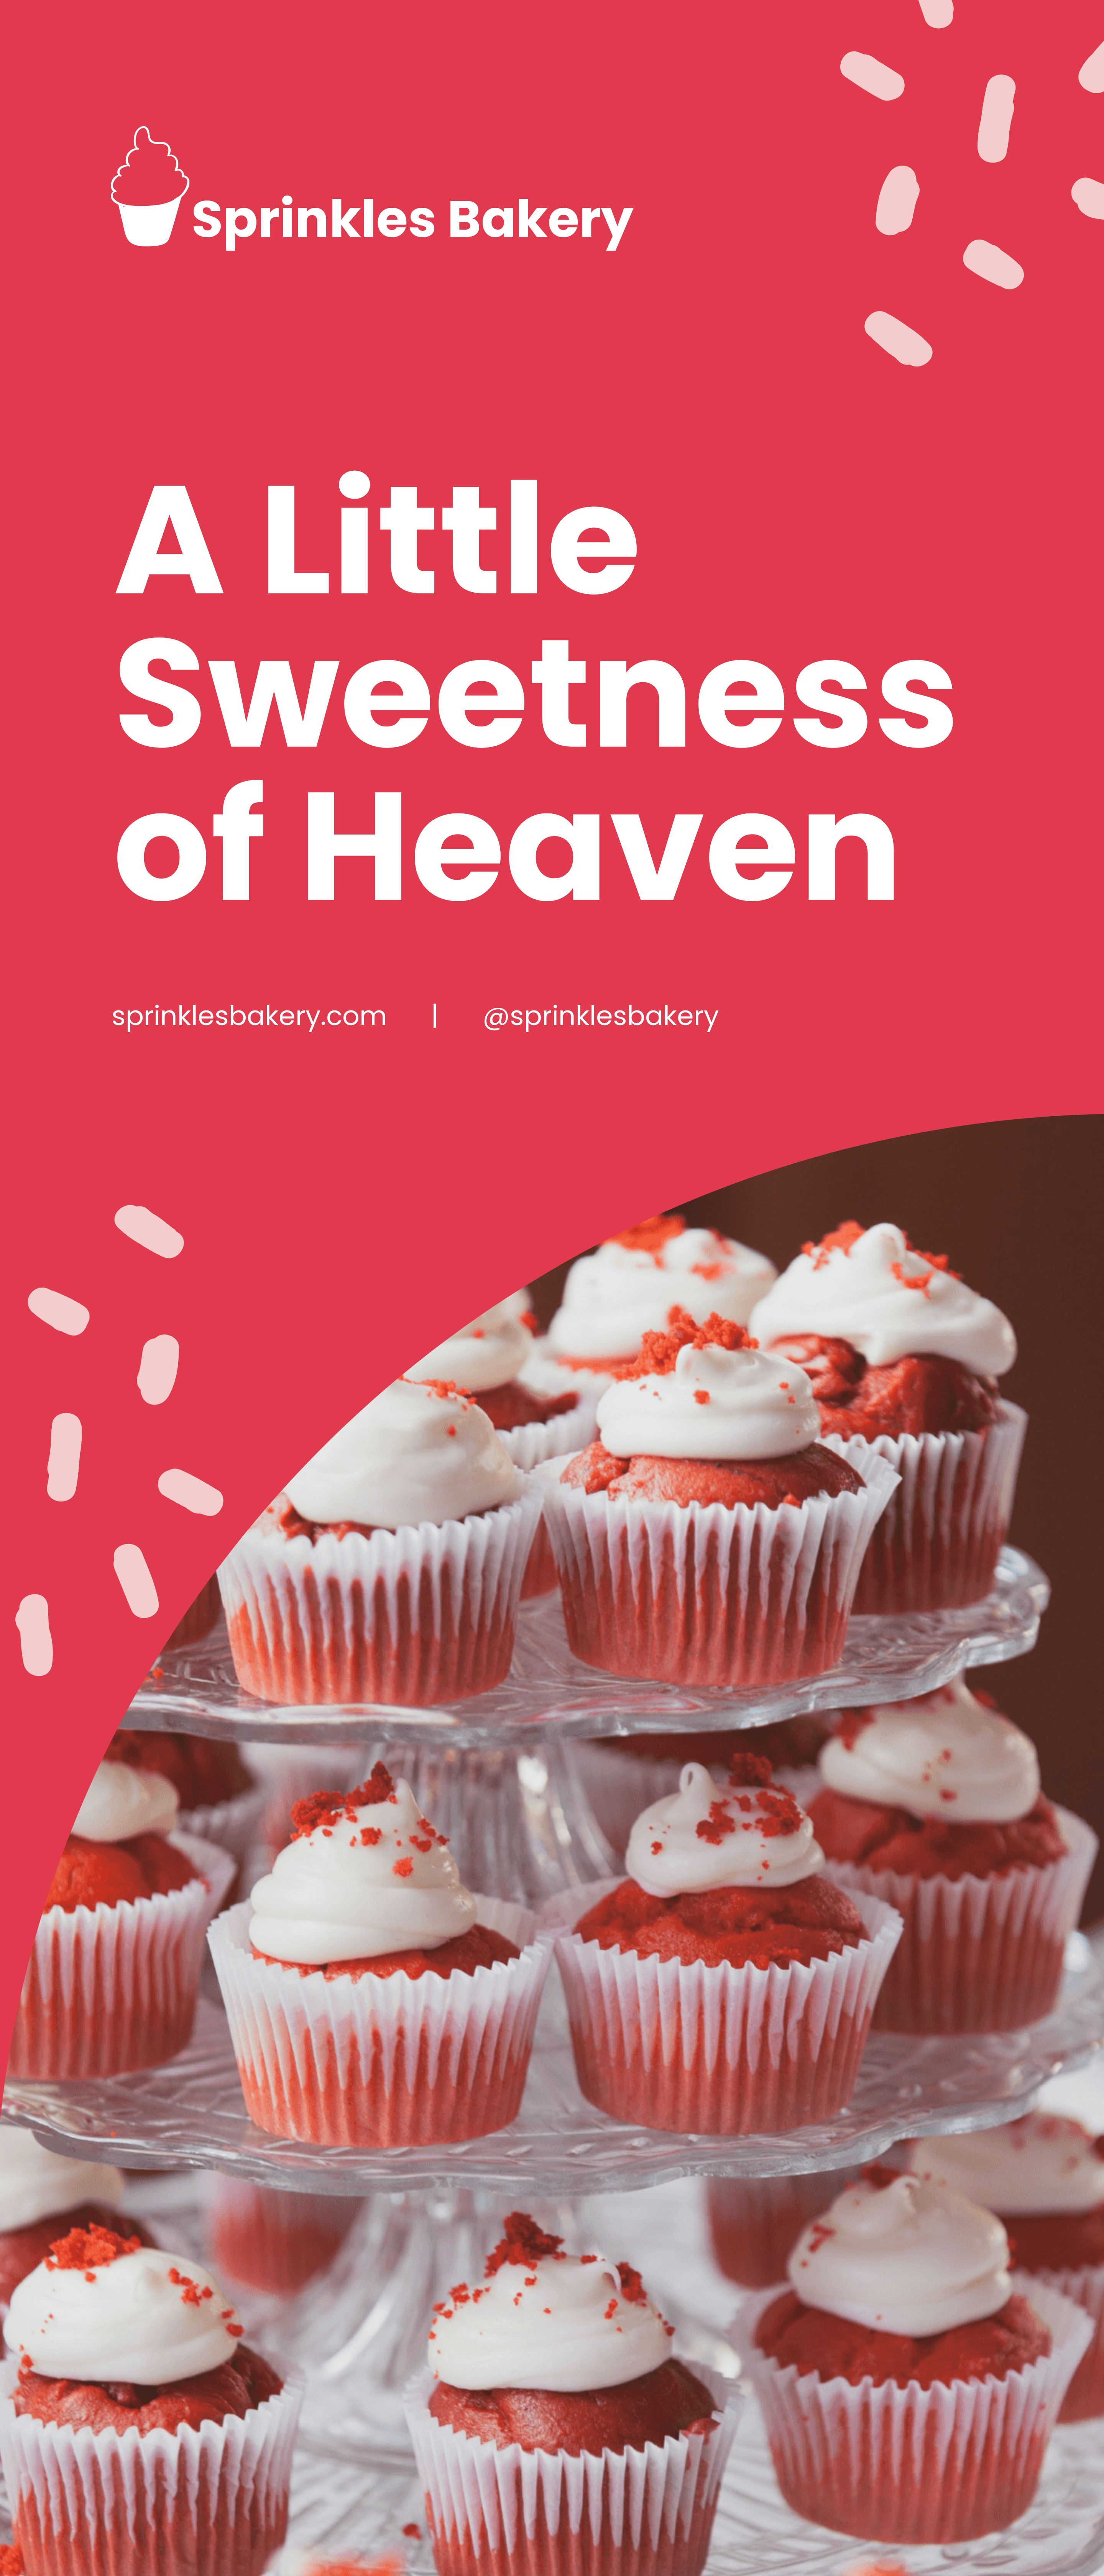 cupcake-rollup-banner-template